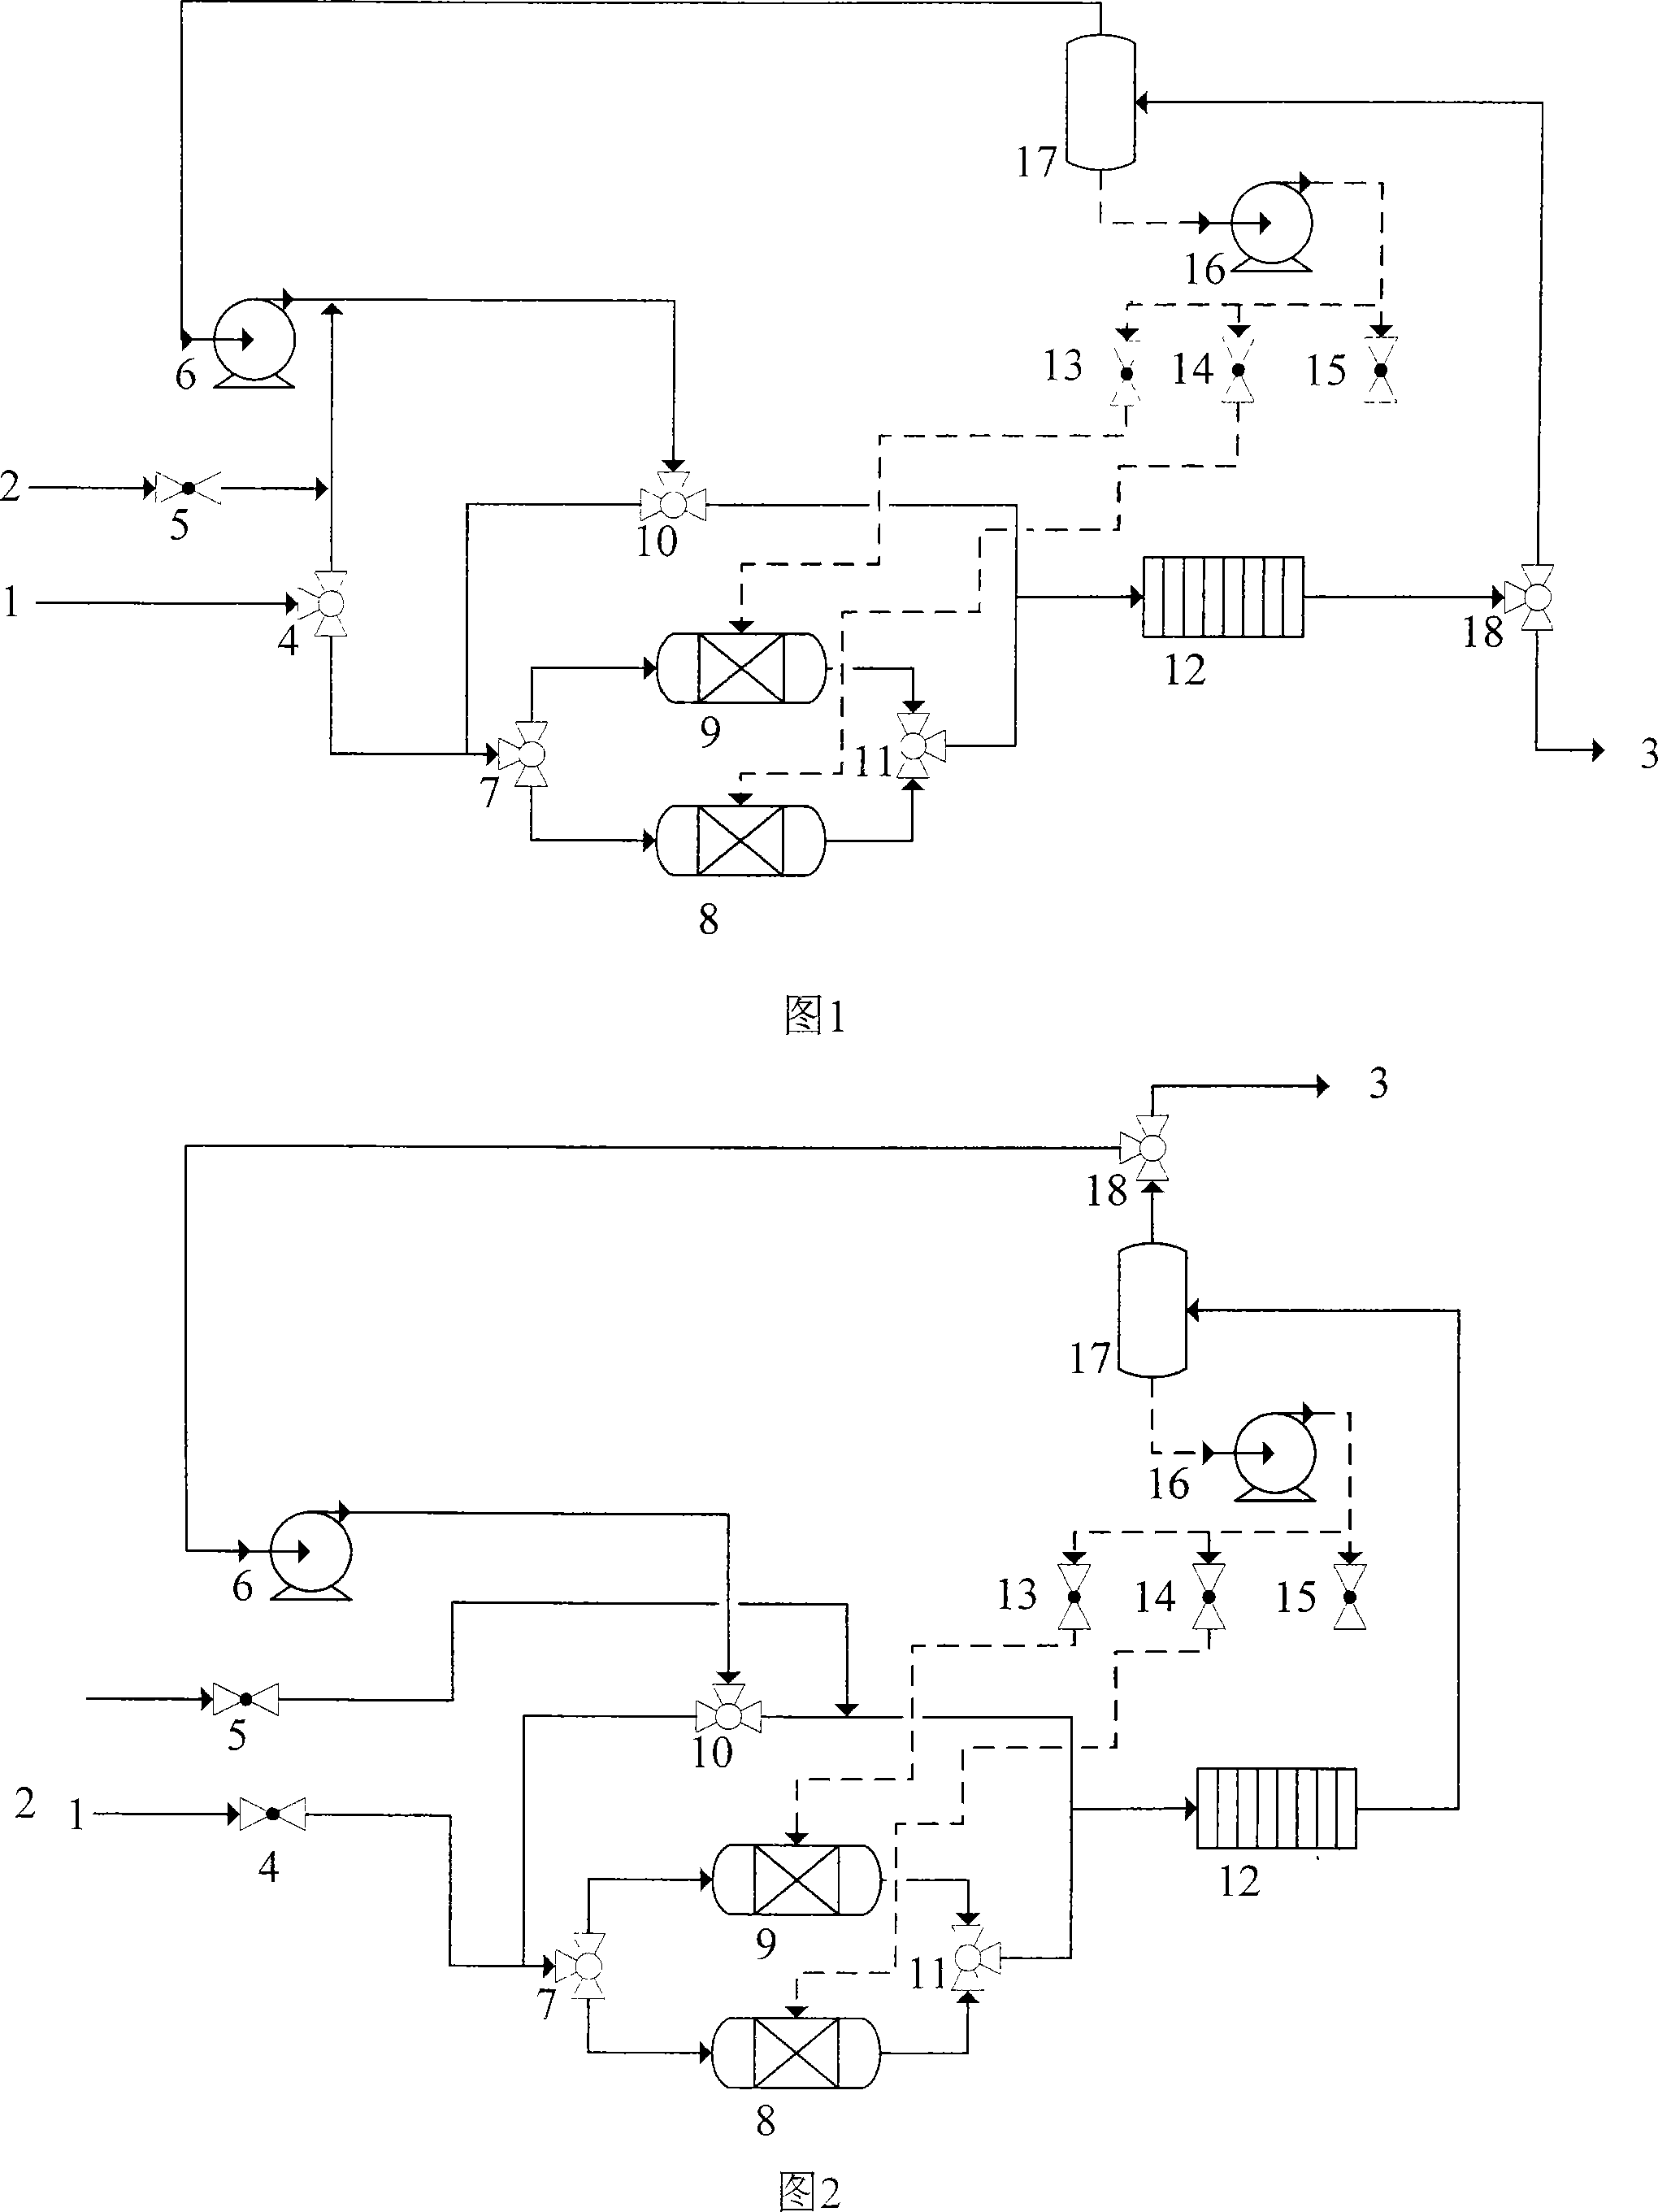 Method for processing frostbite prevention and quick startup of hydrogen stack